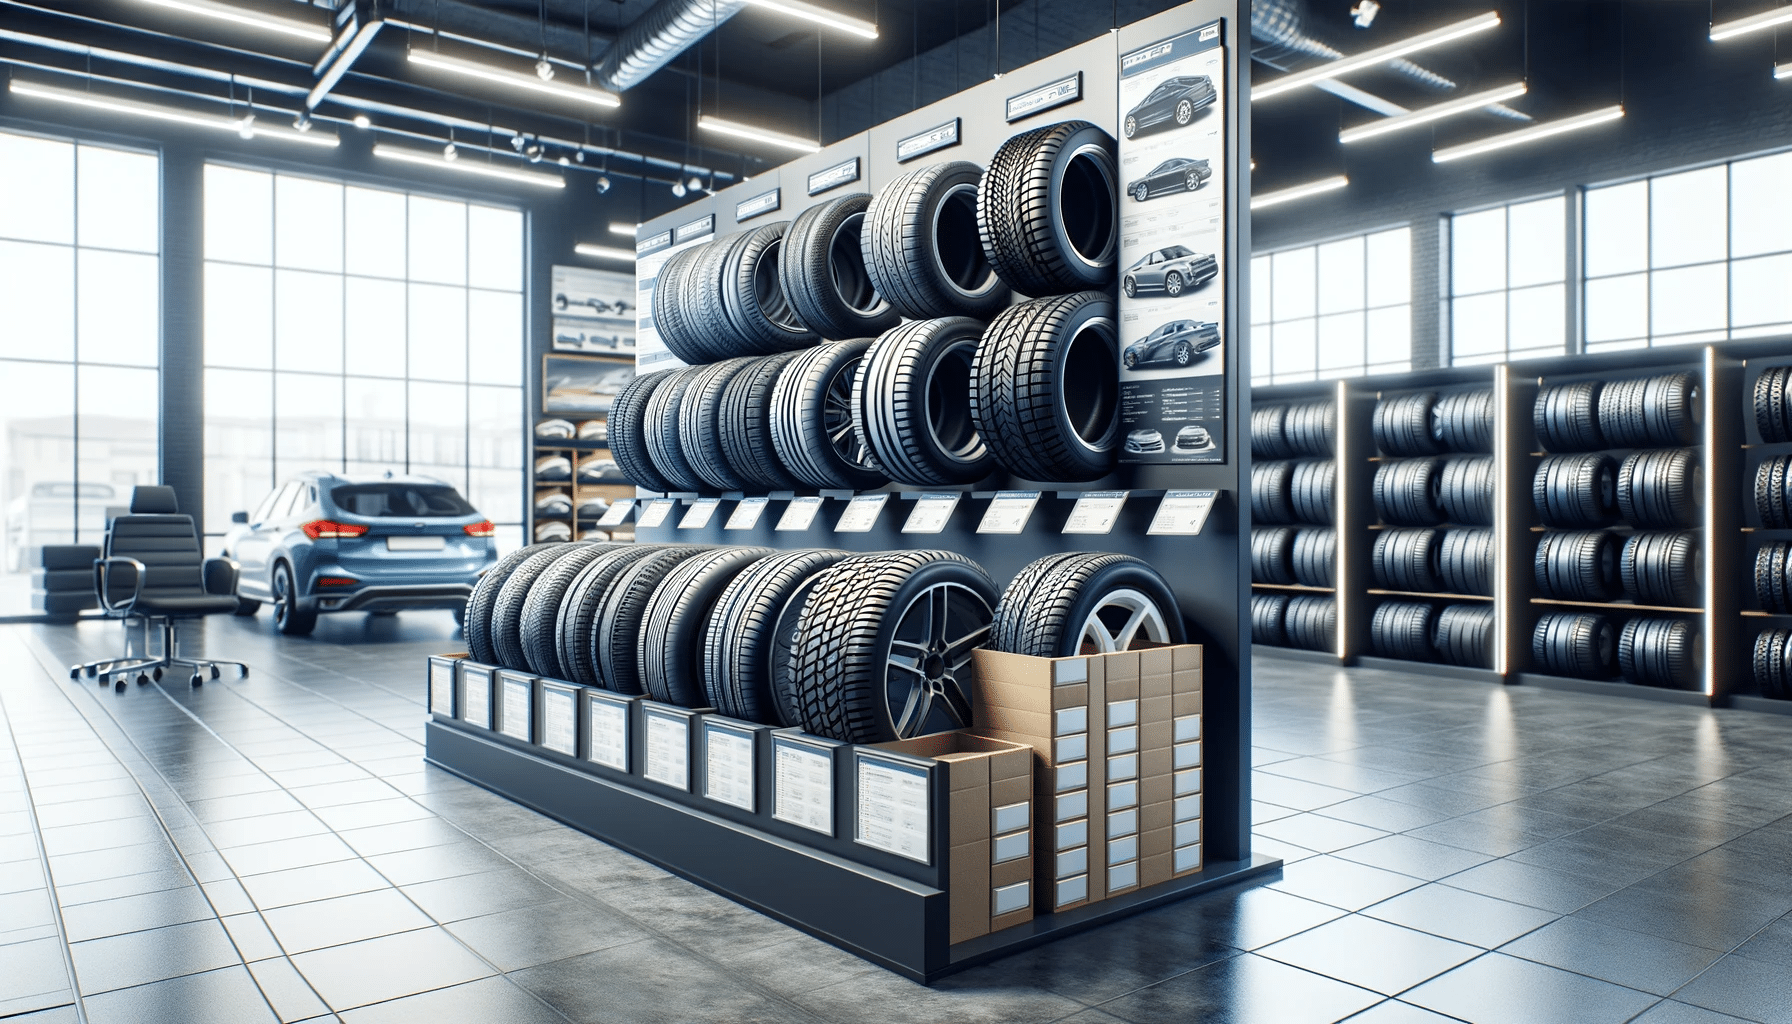 A-variety-of-new-car-tires-displayed-in-a-clean-and-organized-manner-in-an-auto-repair-shop-the-tires-vary-in-size-and-tread-patterns-suitable-for-